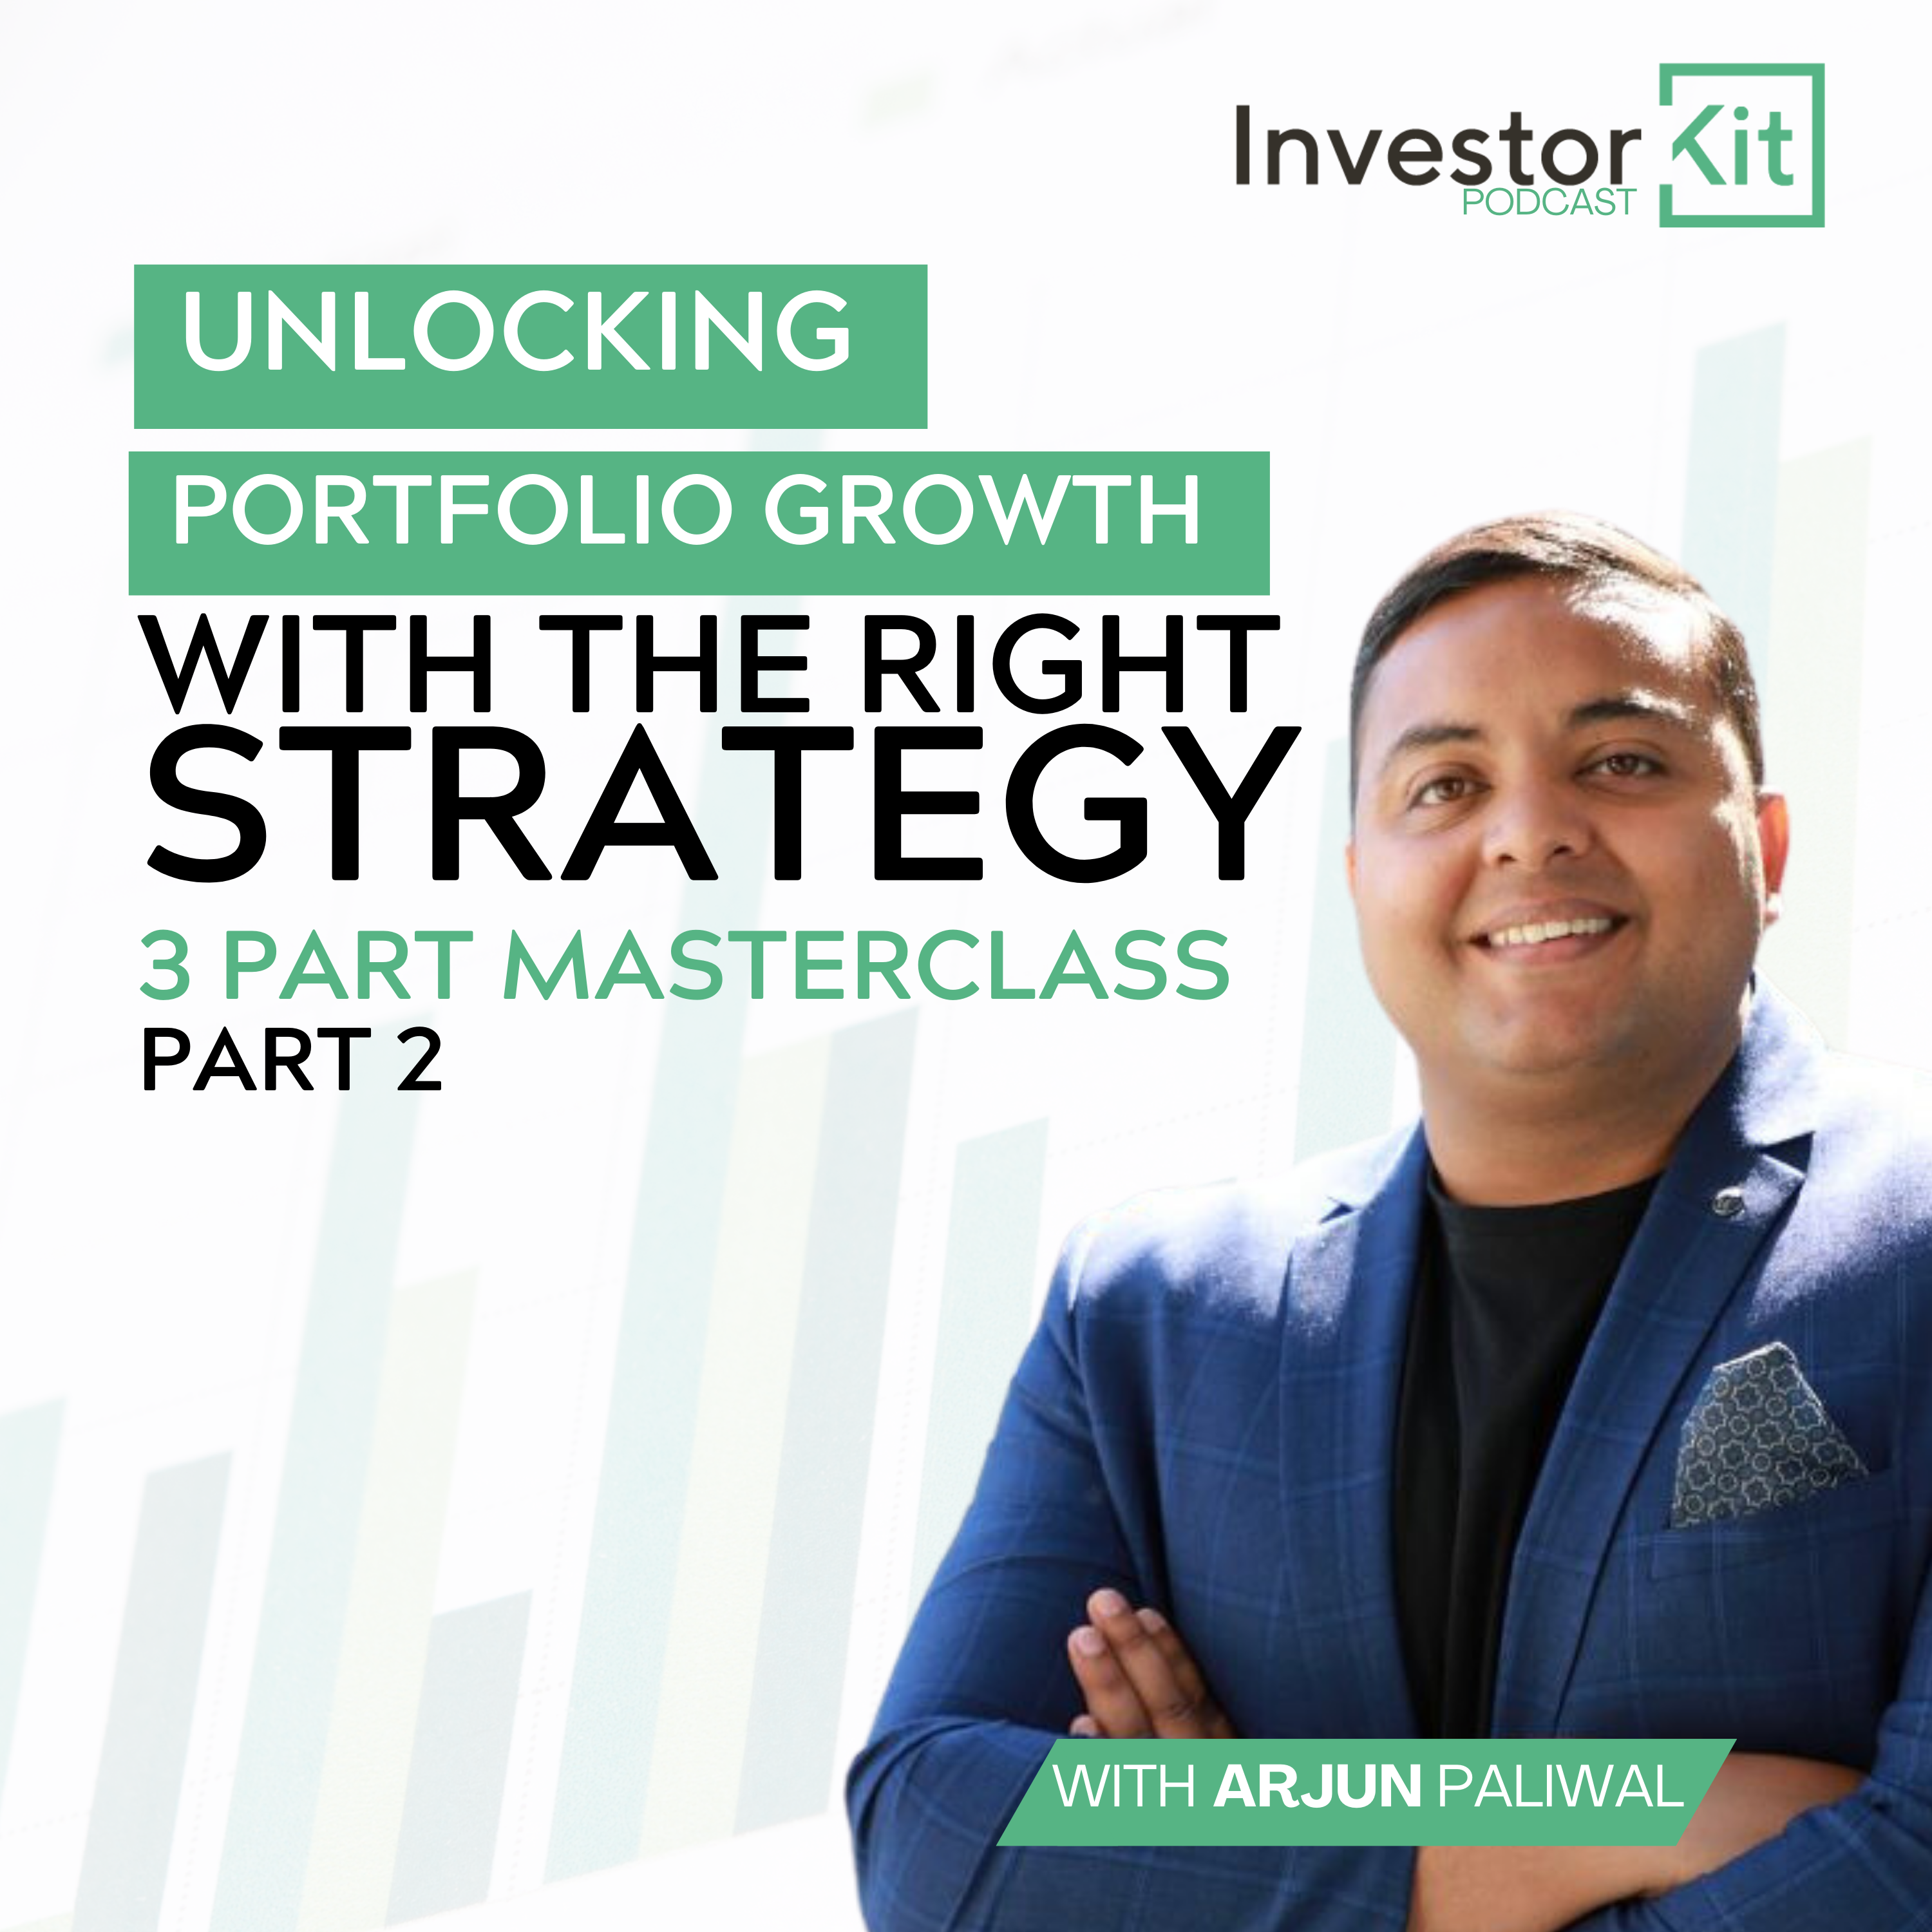 Unlocking Portfolio growth with the Right Strategy - 3 Part Masterclass